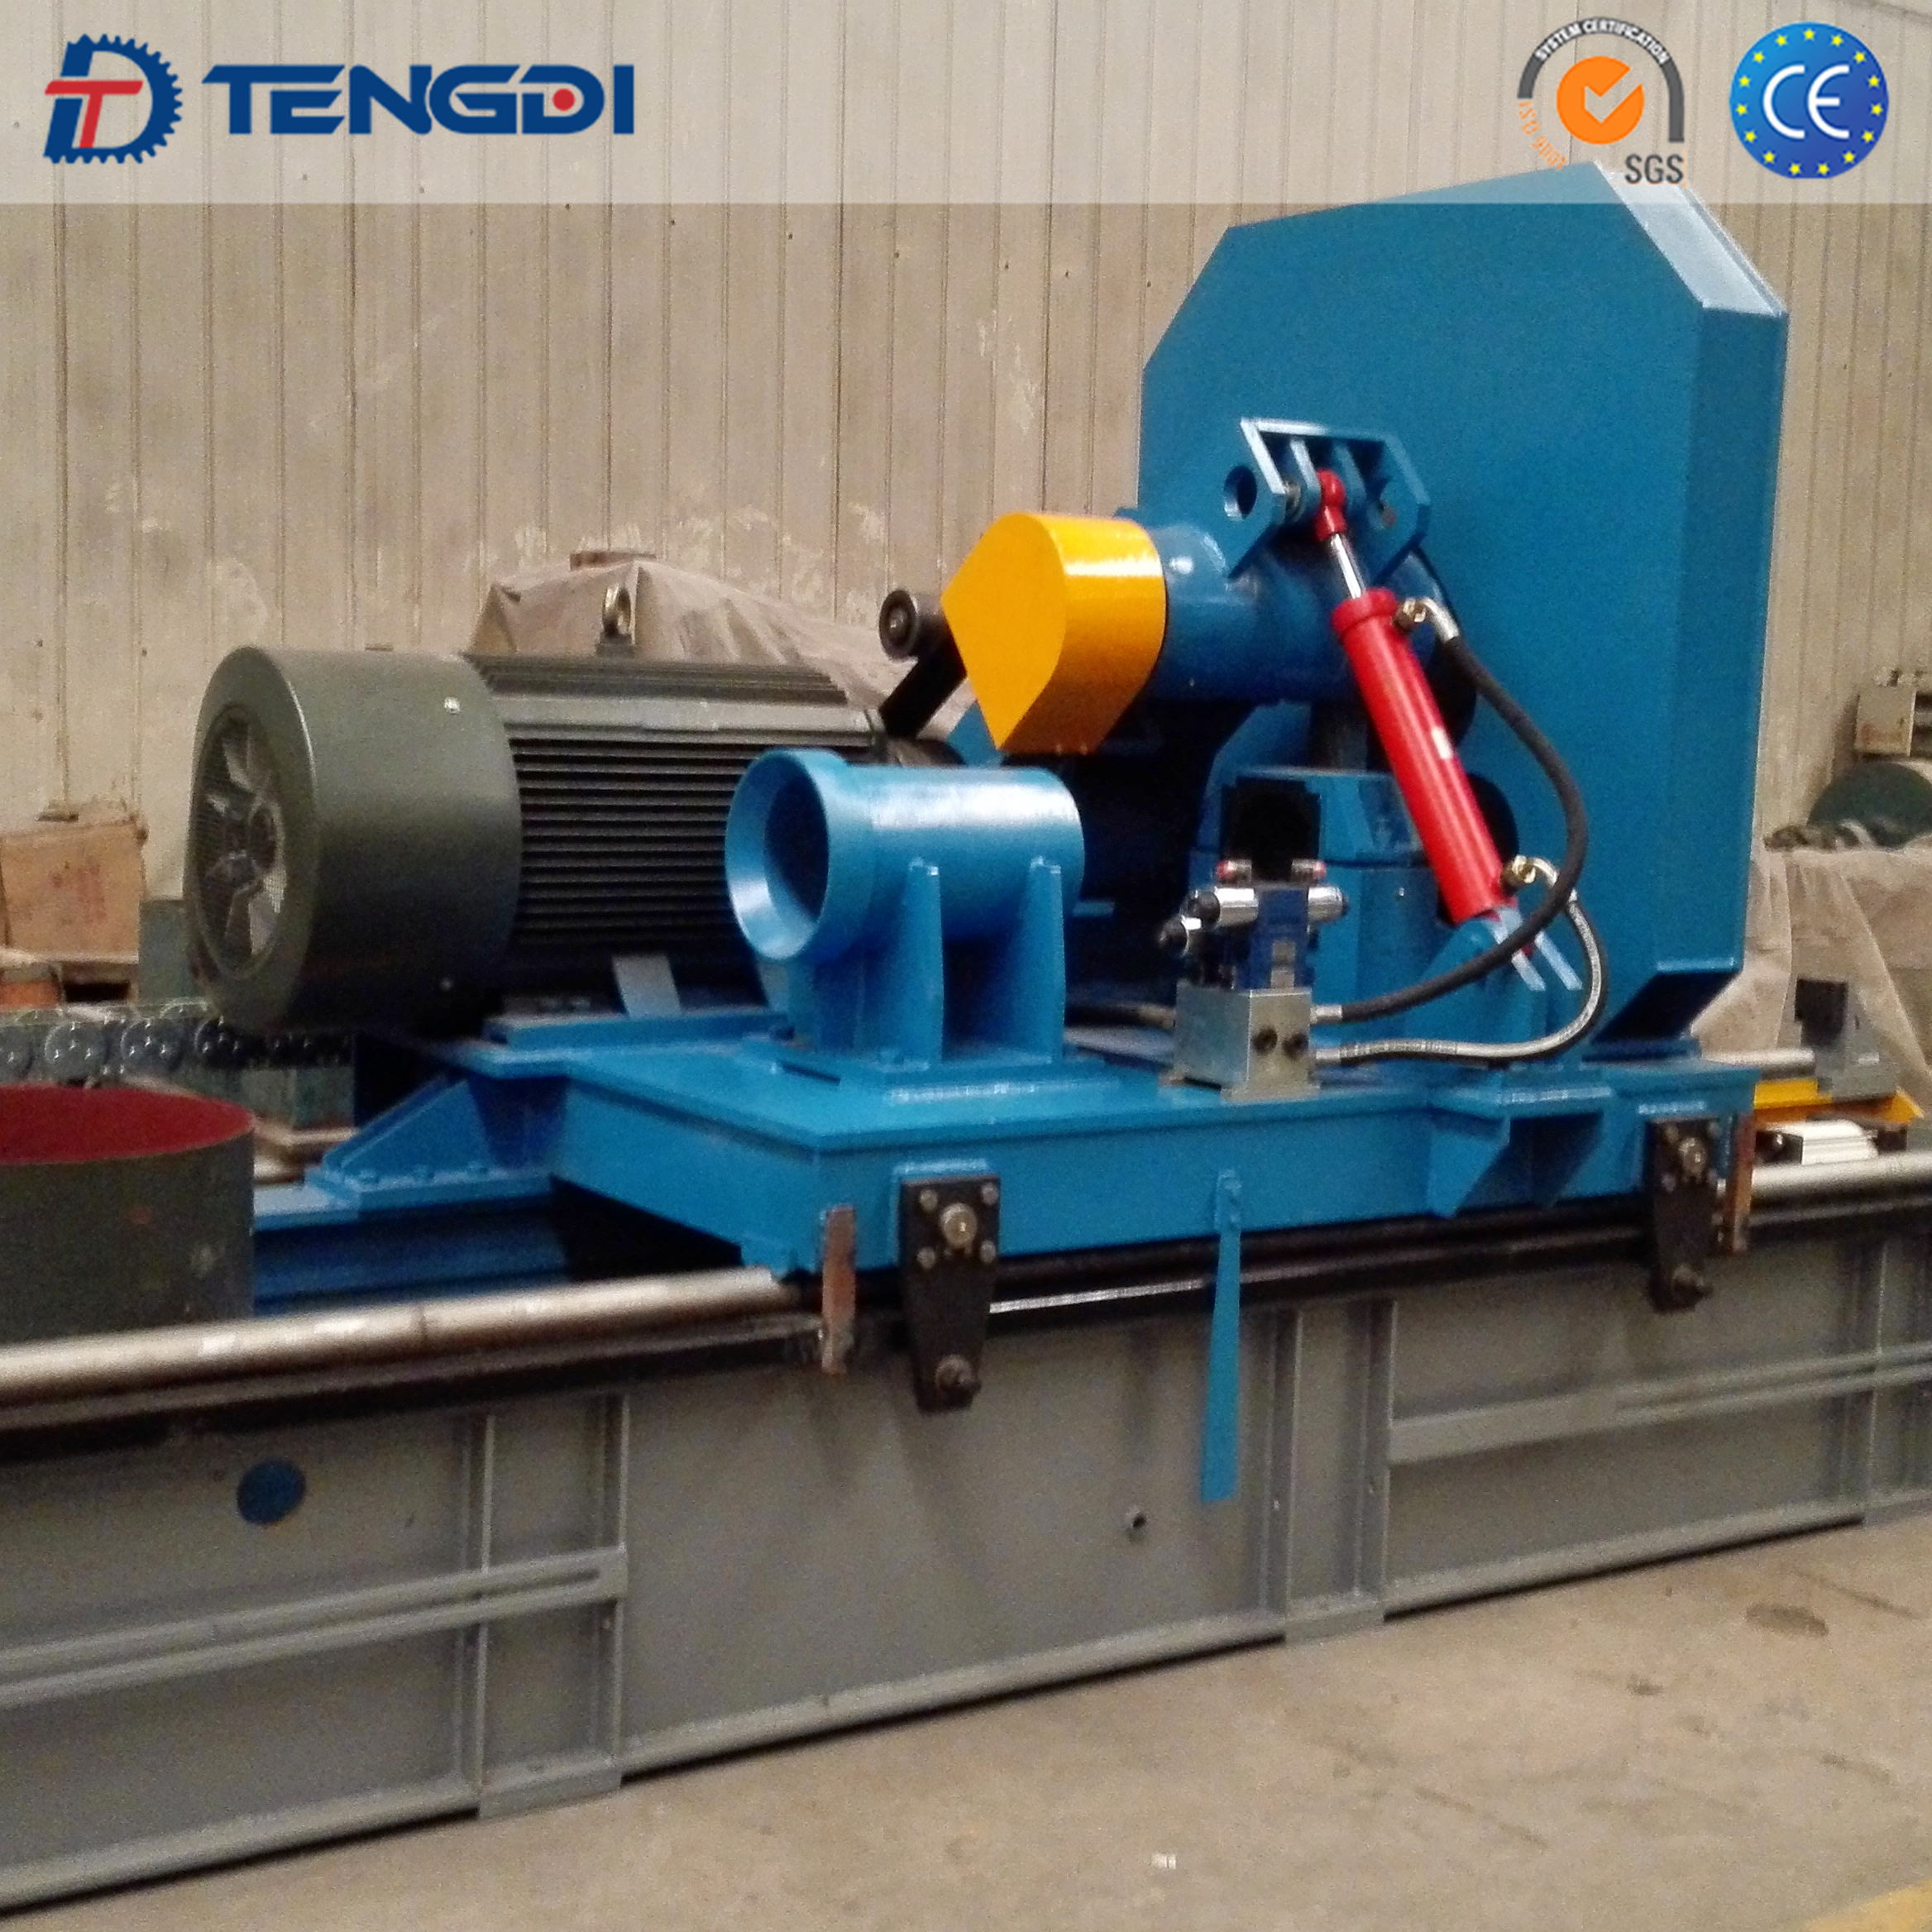 Cost-Effective Hg219 High Frequency ERW Steel Tube Mill/ Tube Mill Machine/High Frequency Welding ERW Steel Tube Mill/Pipe Machine/Pipe Macking Machine/